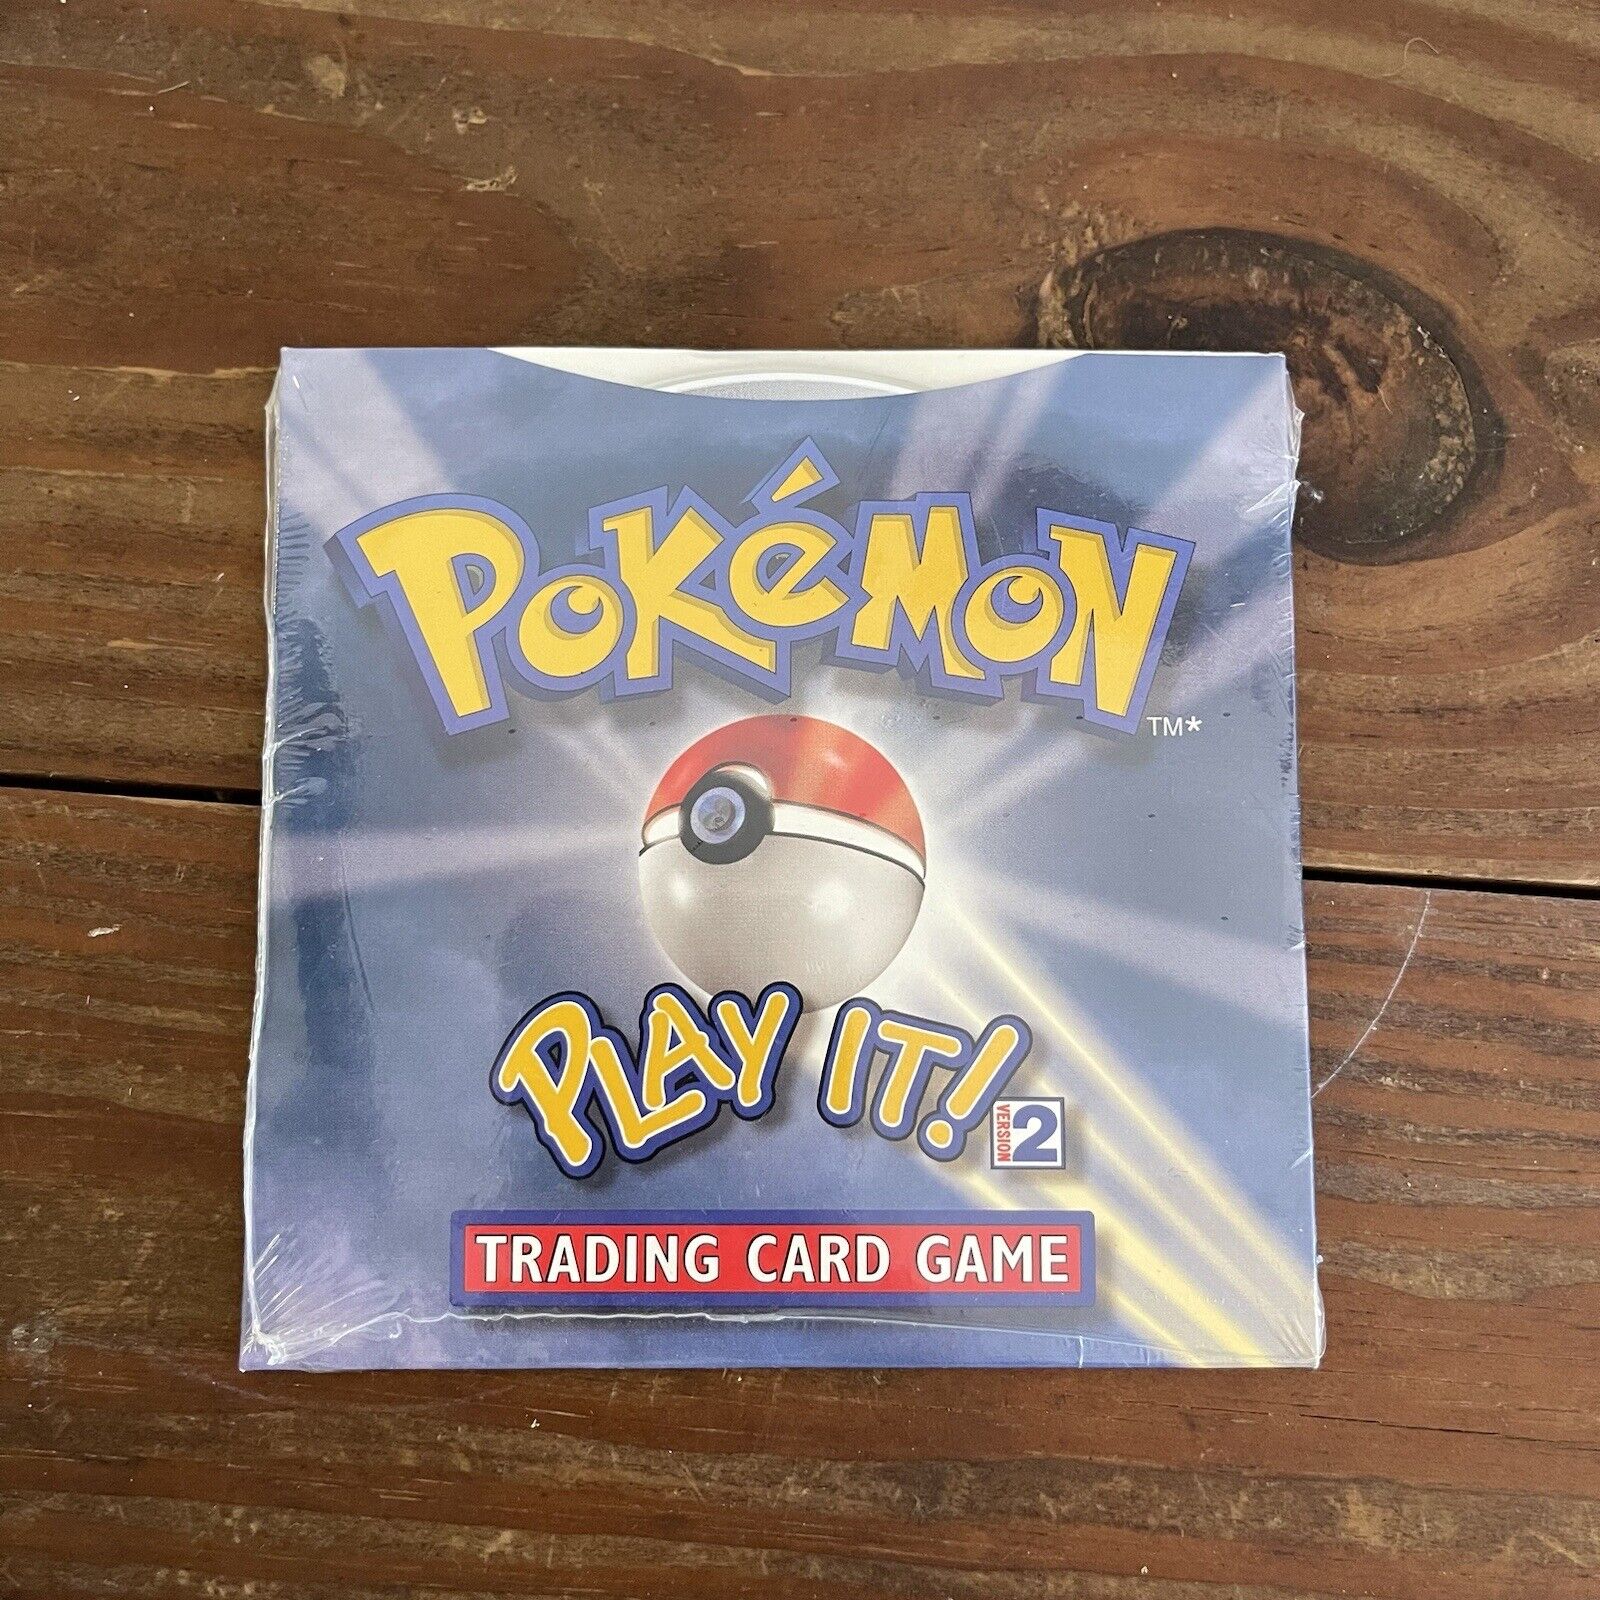 New Sealed Pokemon Play It V2 Trading Card Video Game New CD Disc 2000